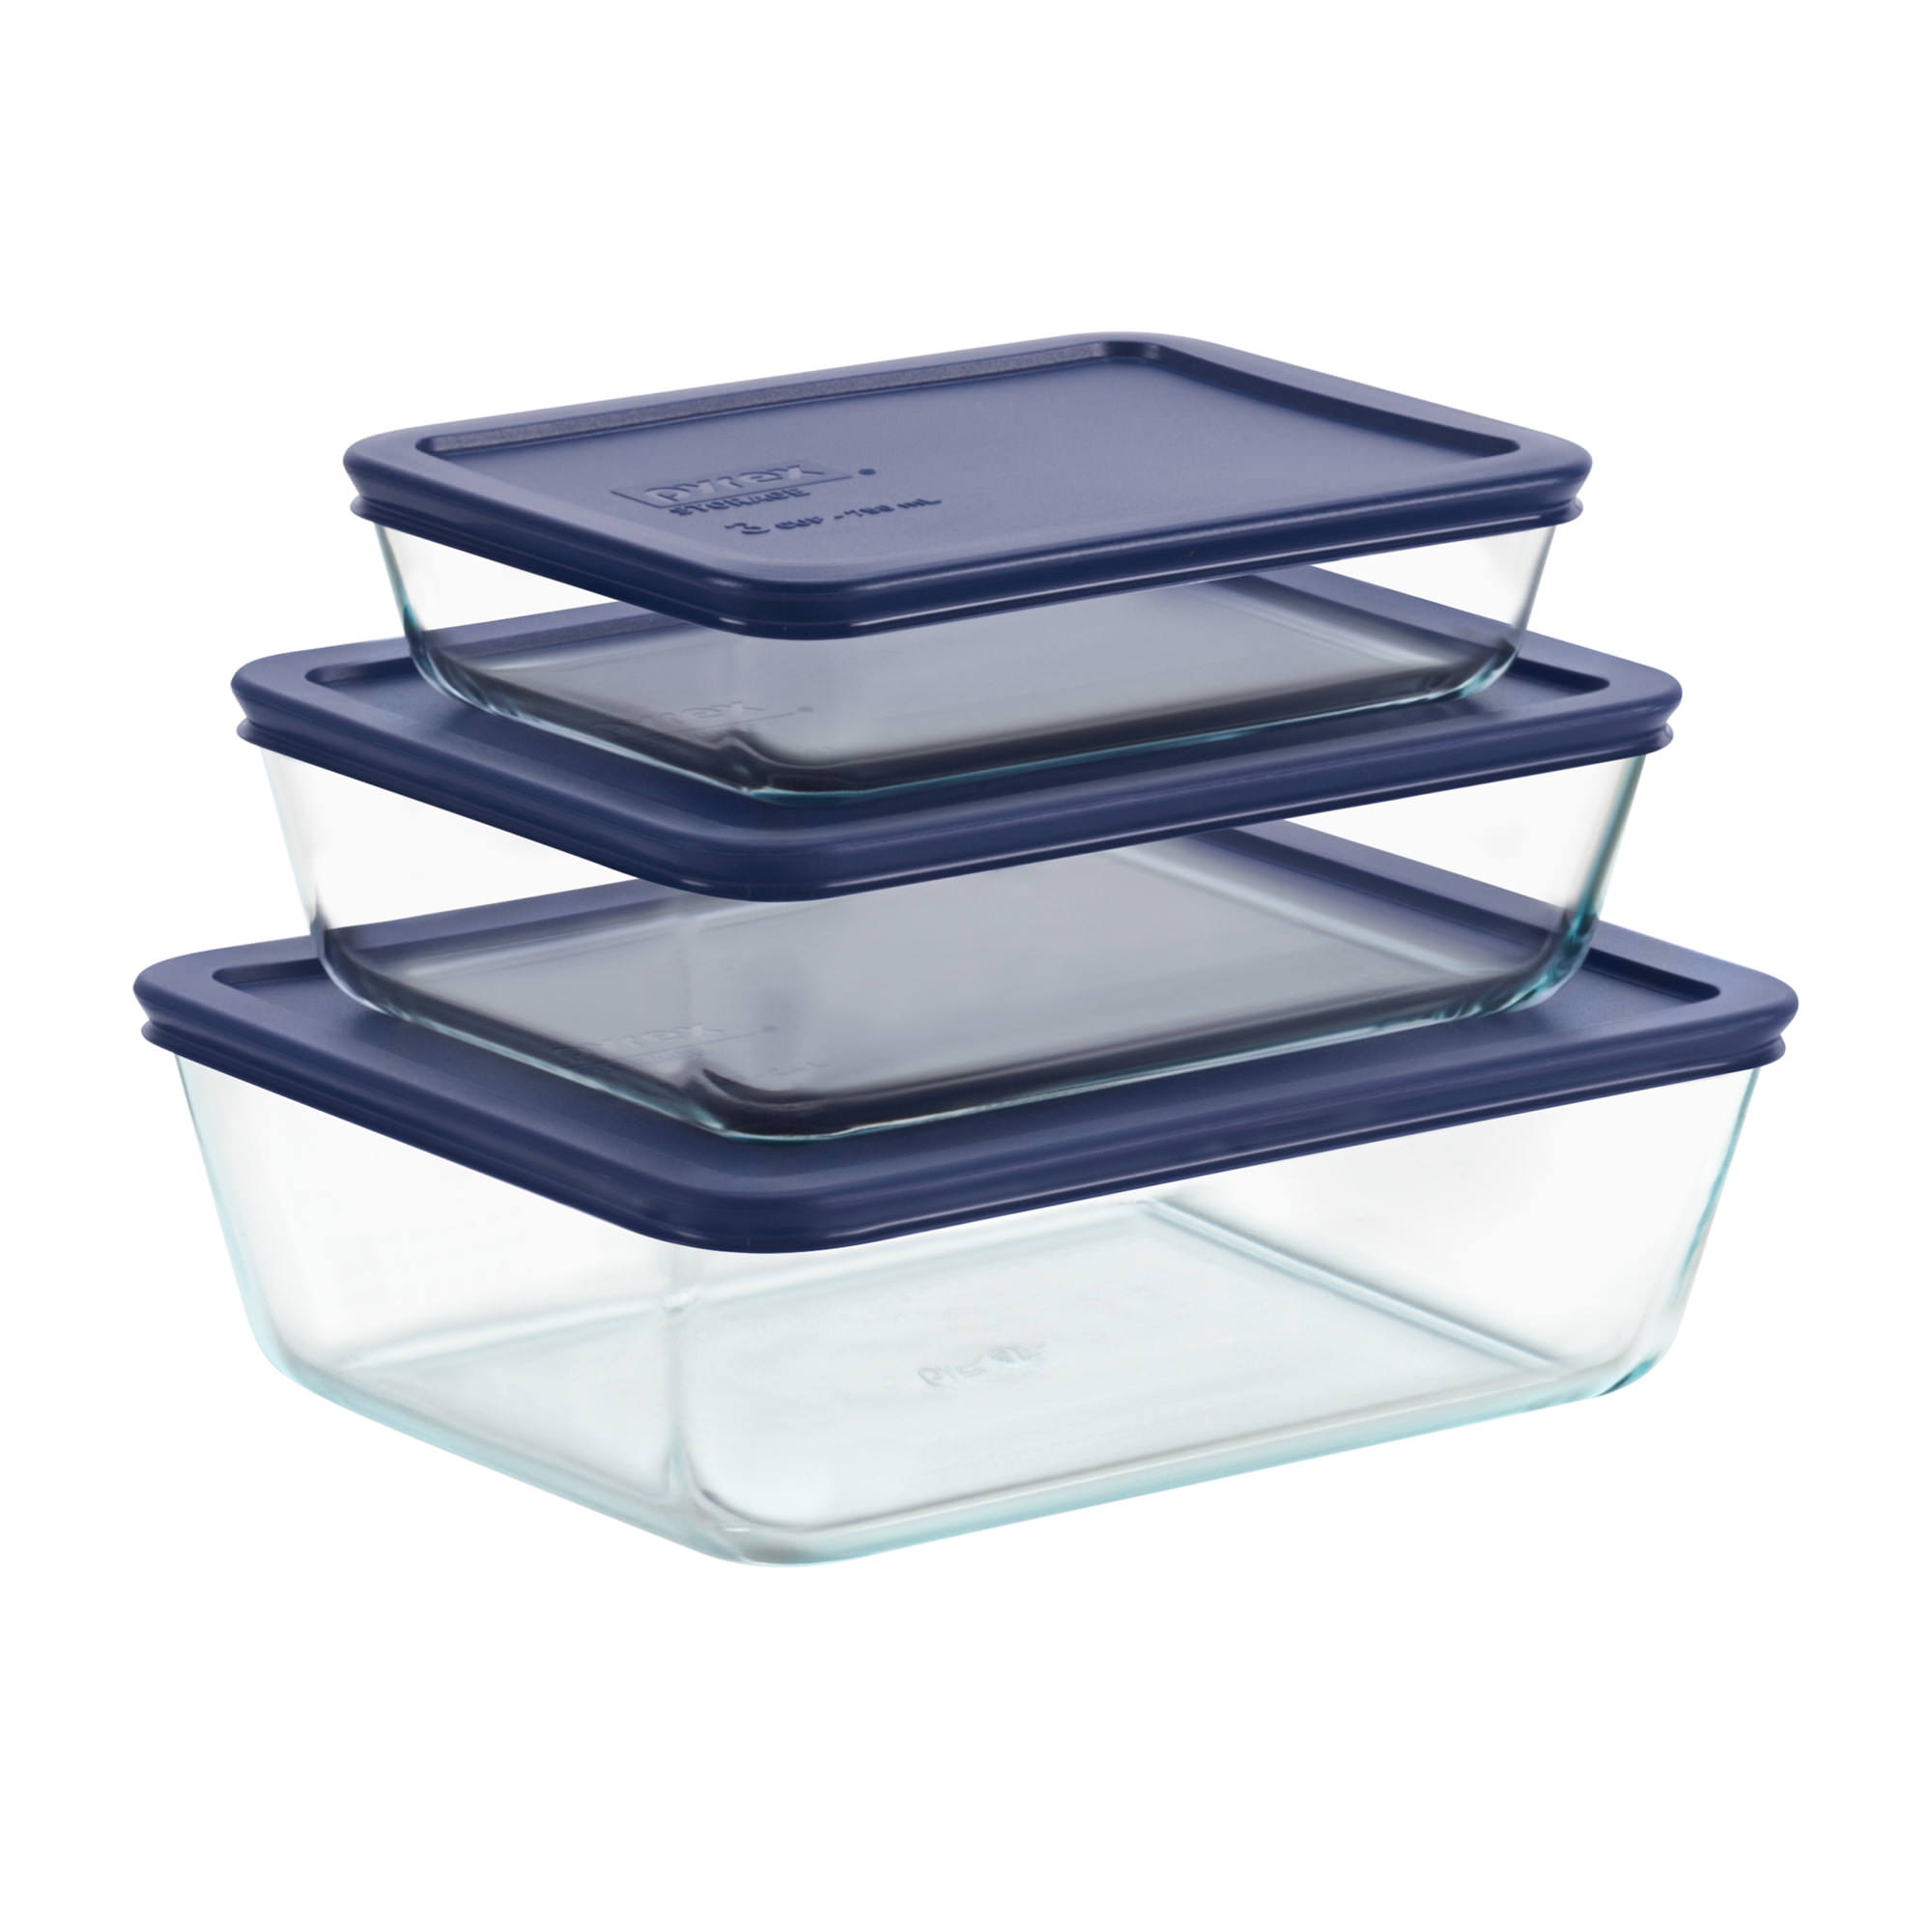 Pyrex Simply Store Rectangular Food Container Set 6pc Image 1